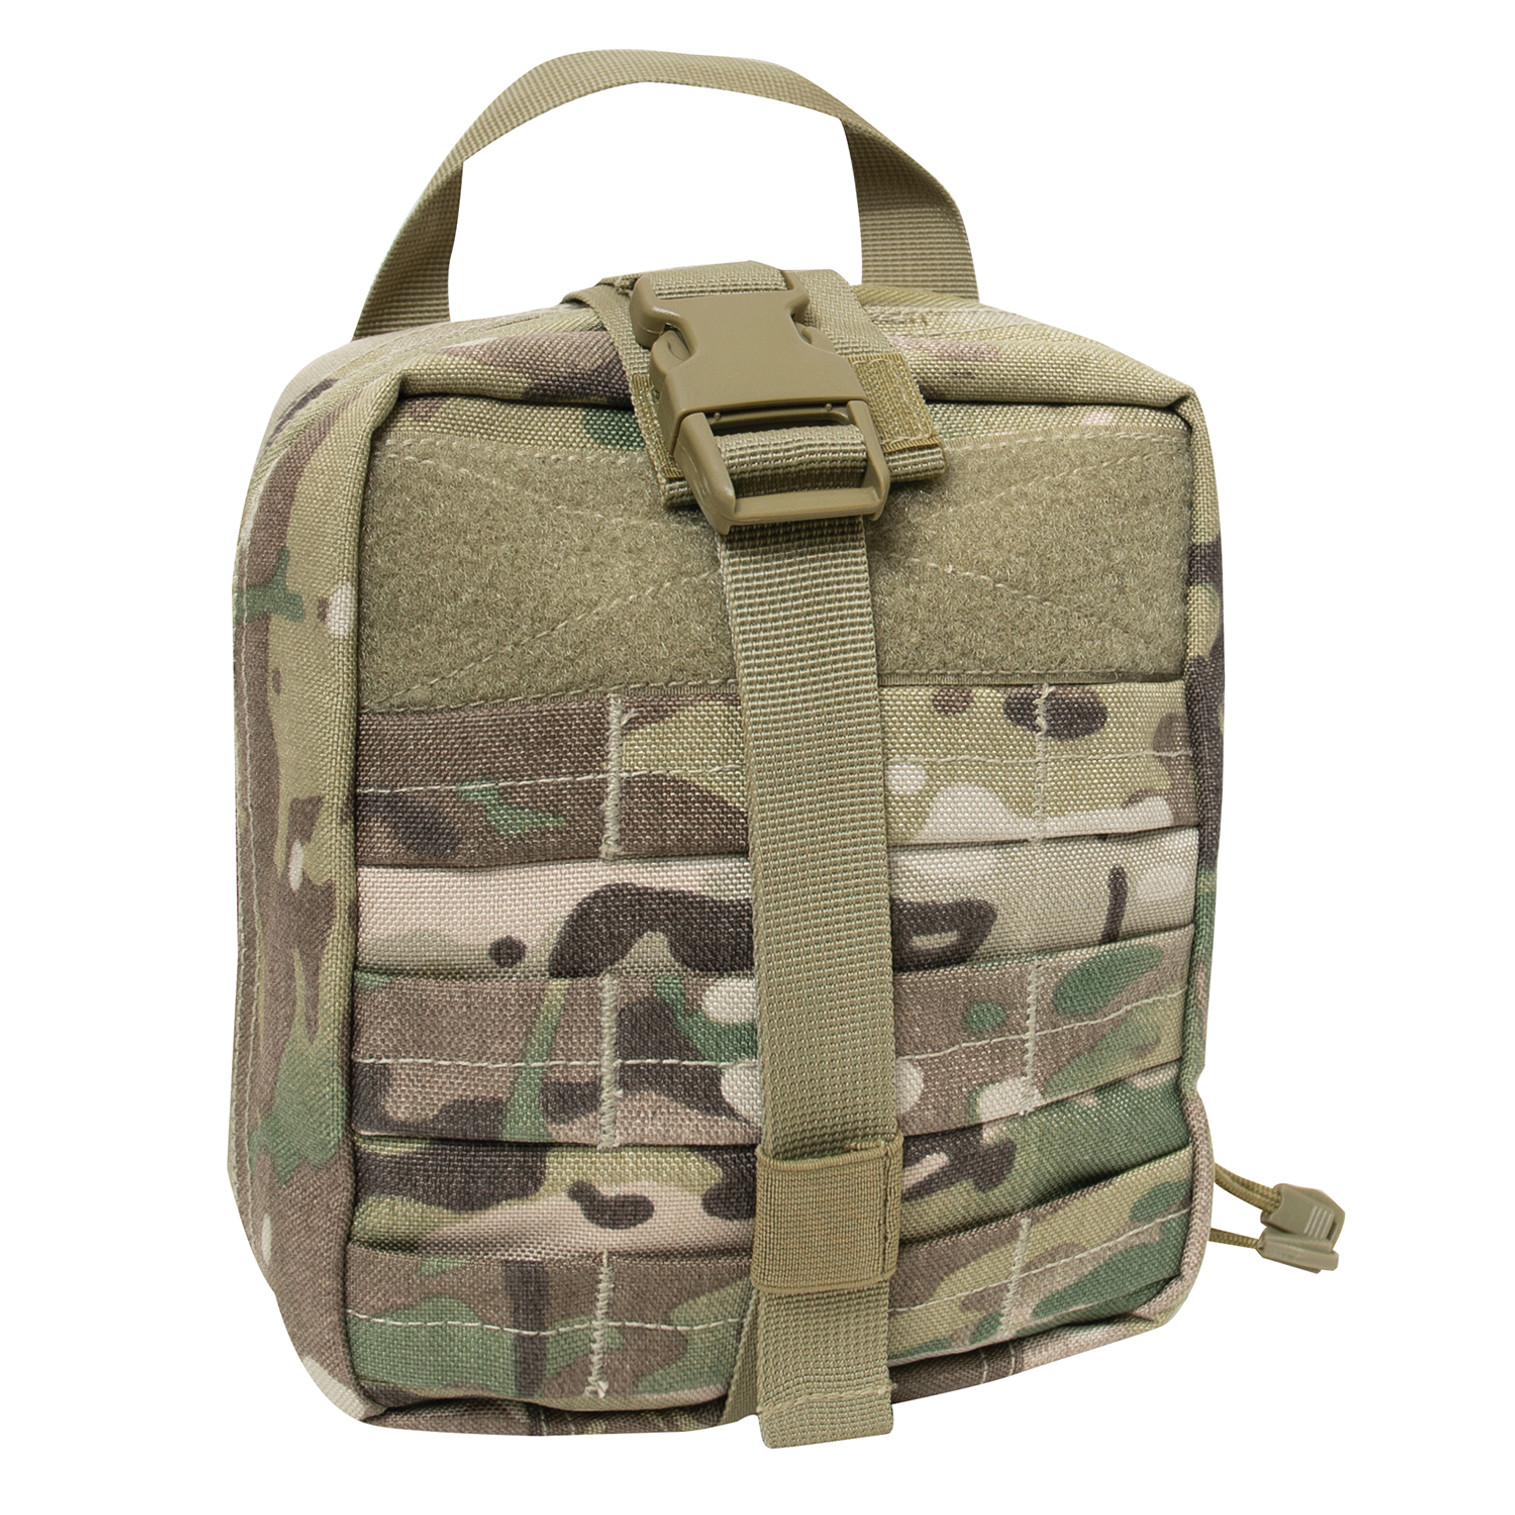 Rothco Tactical MOLLE Breakaway Pouch - Multicam